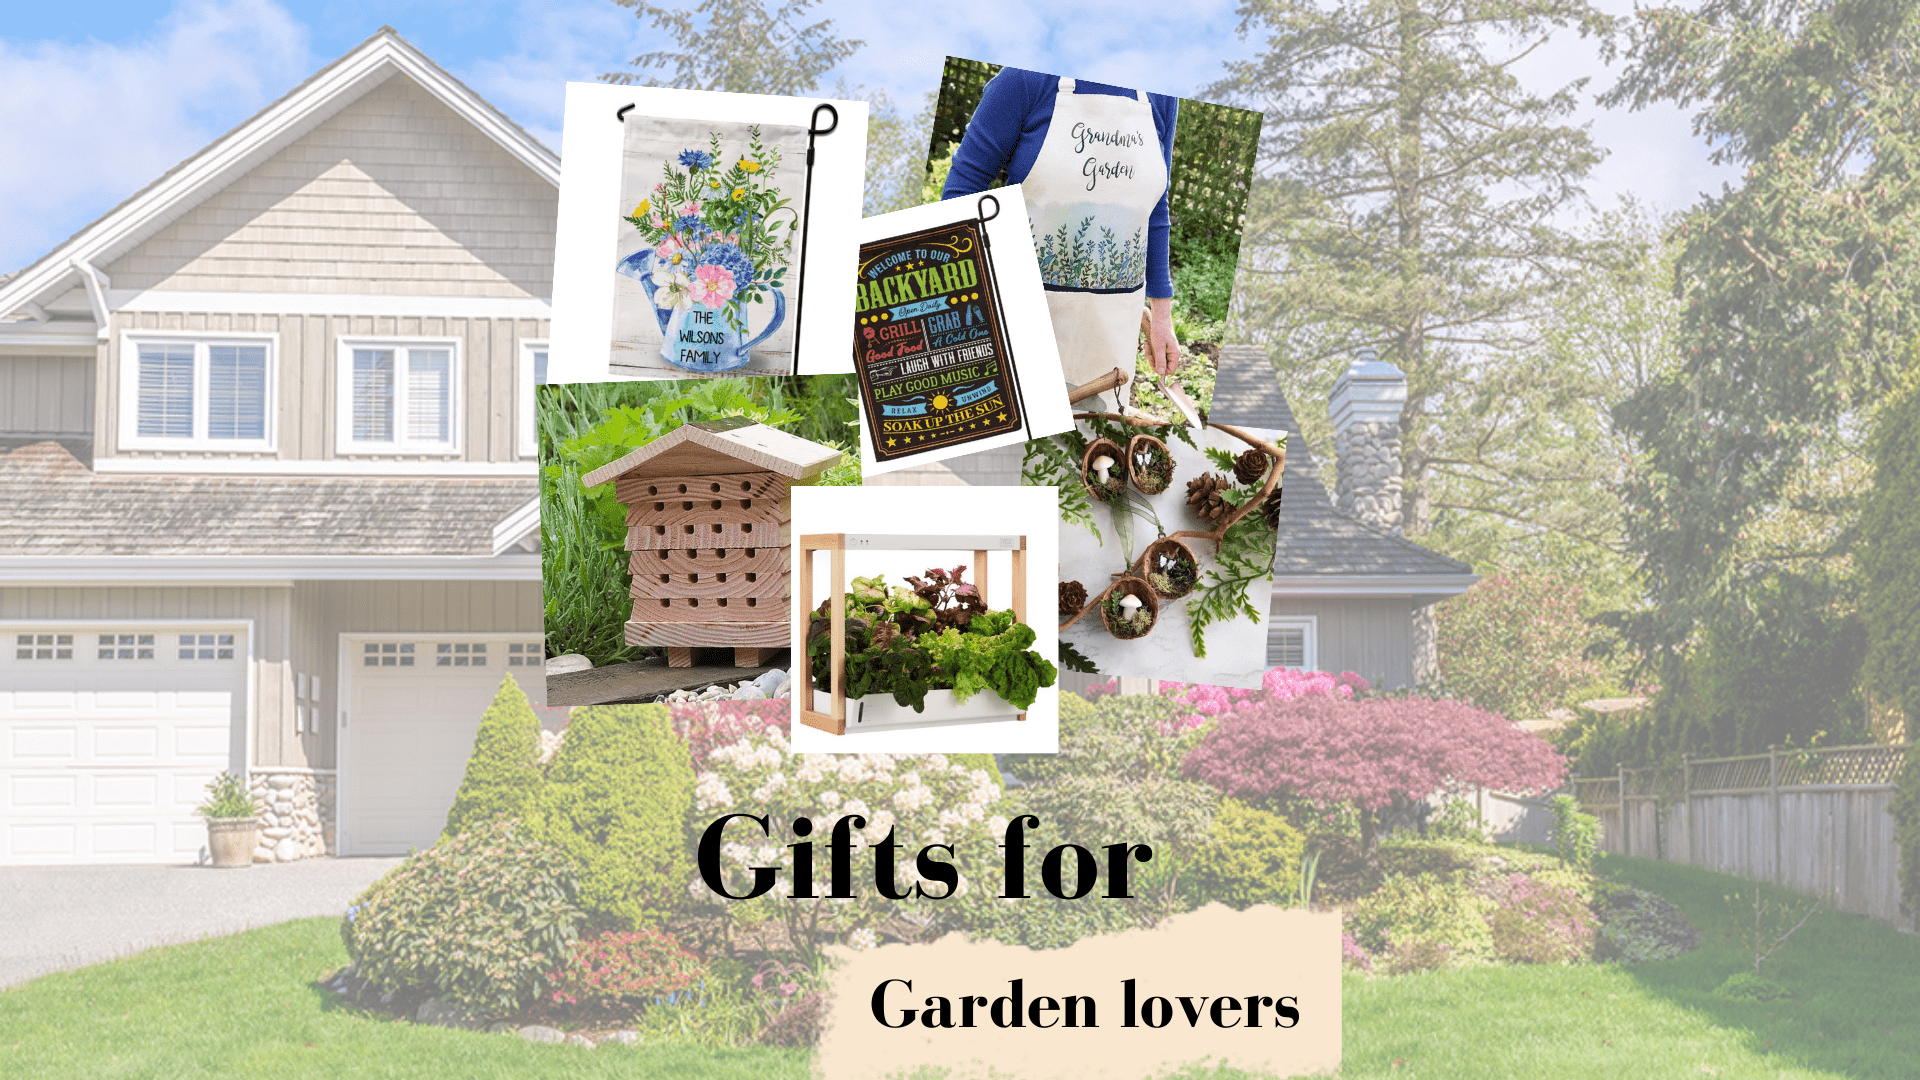 Plant the Love with these Gifts for Garden Lovers